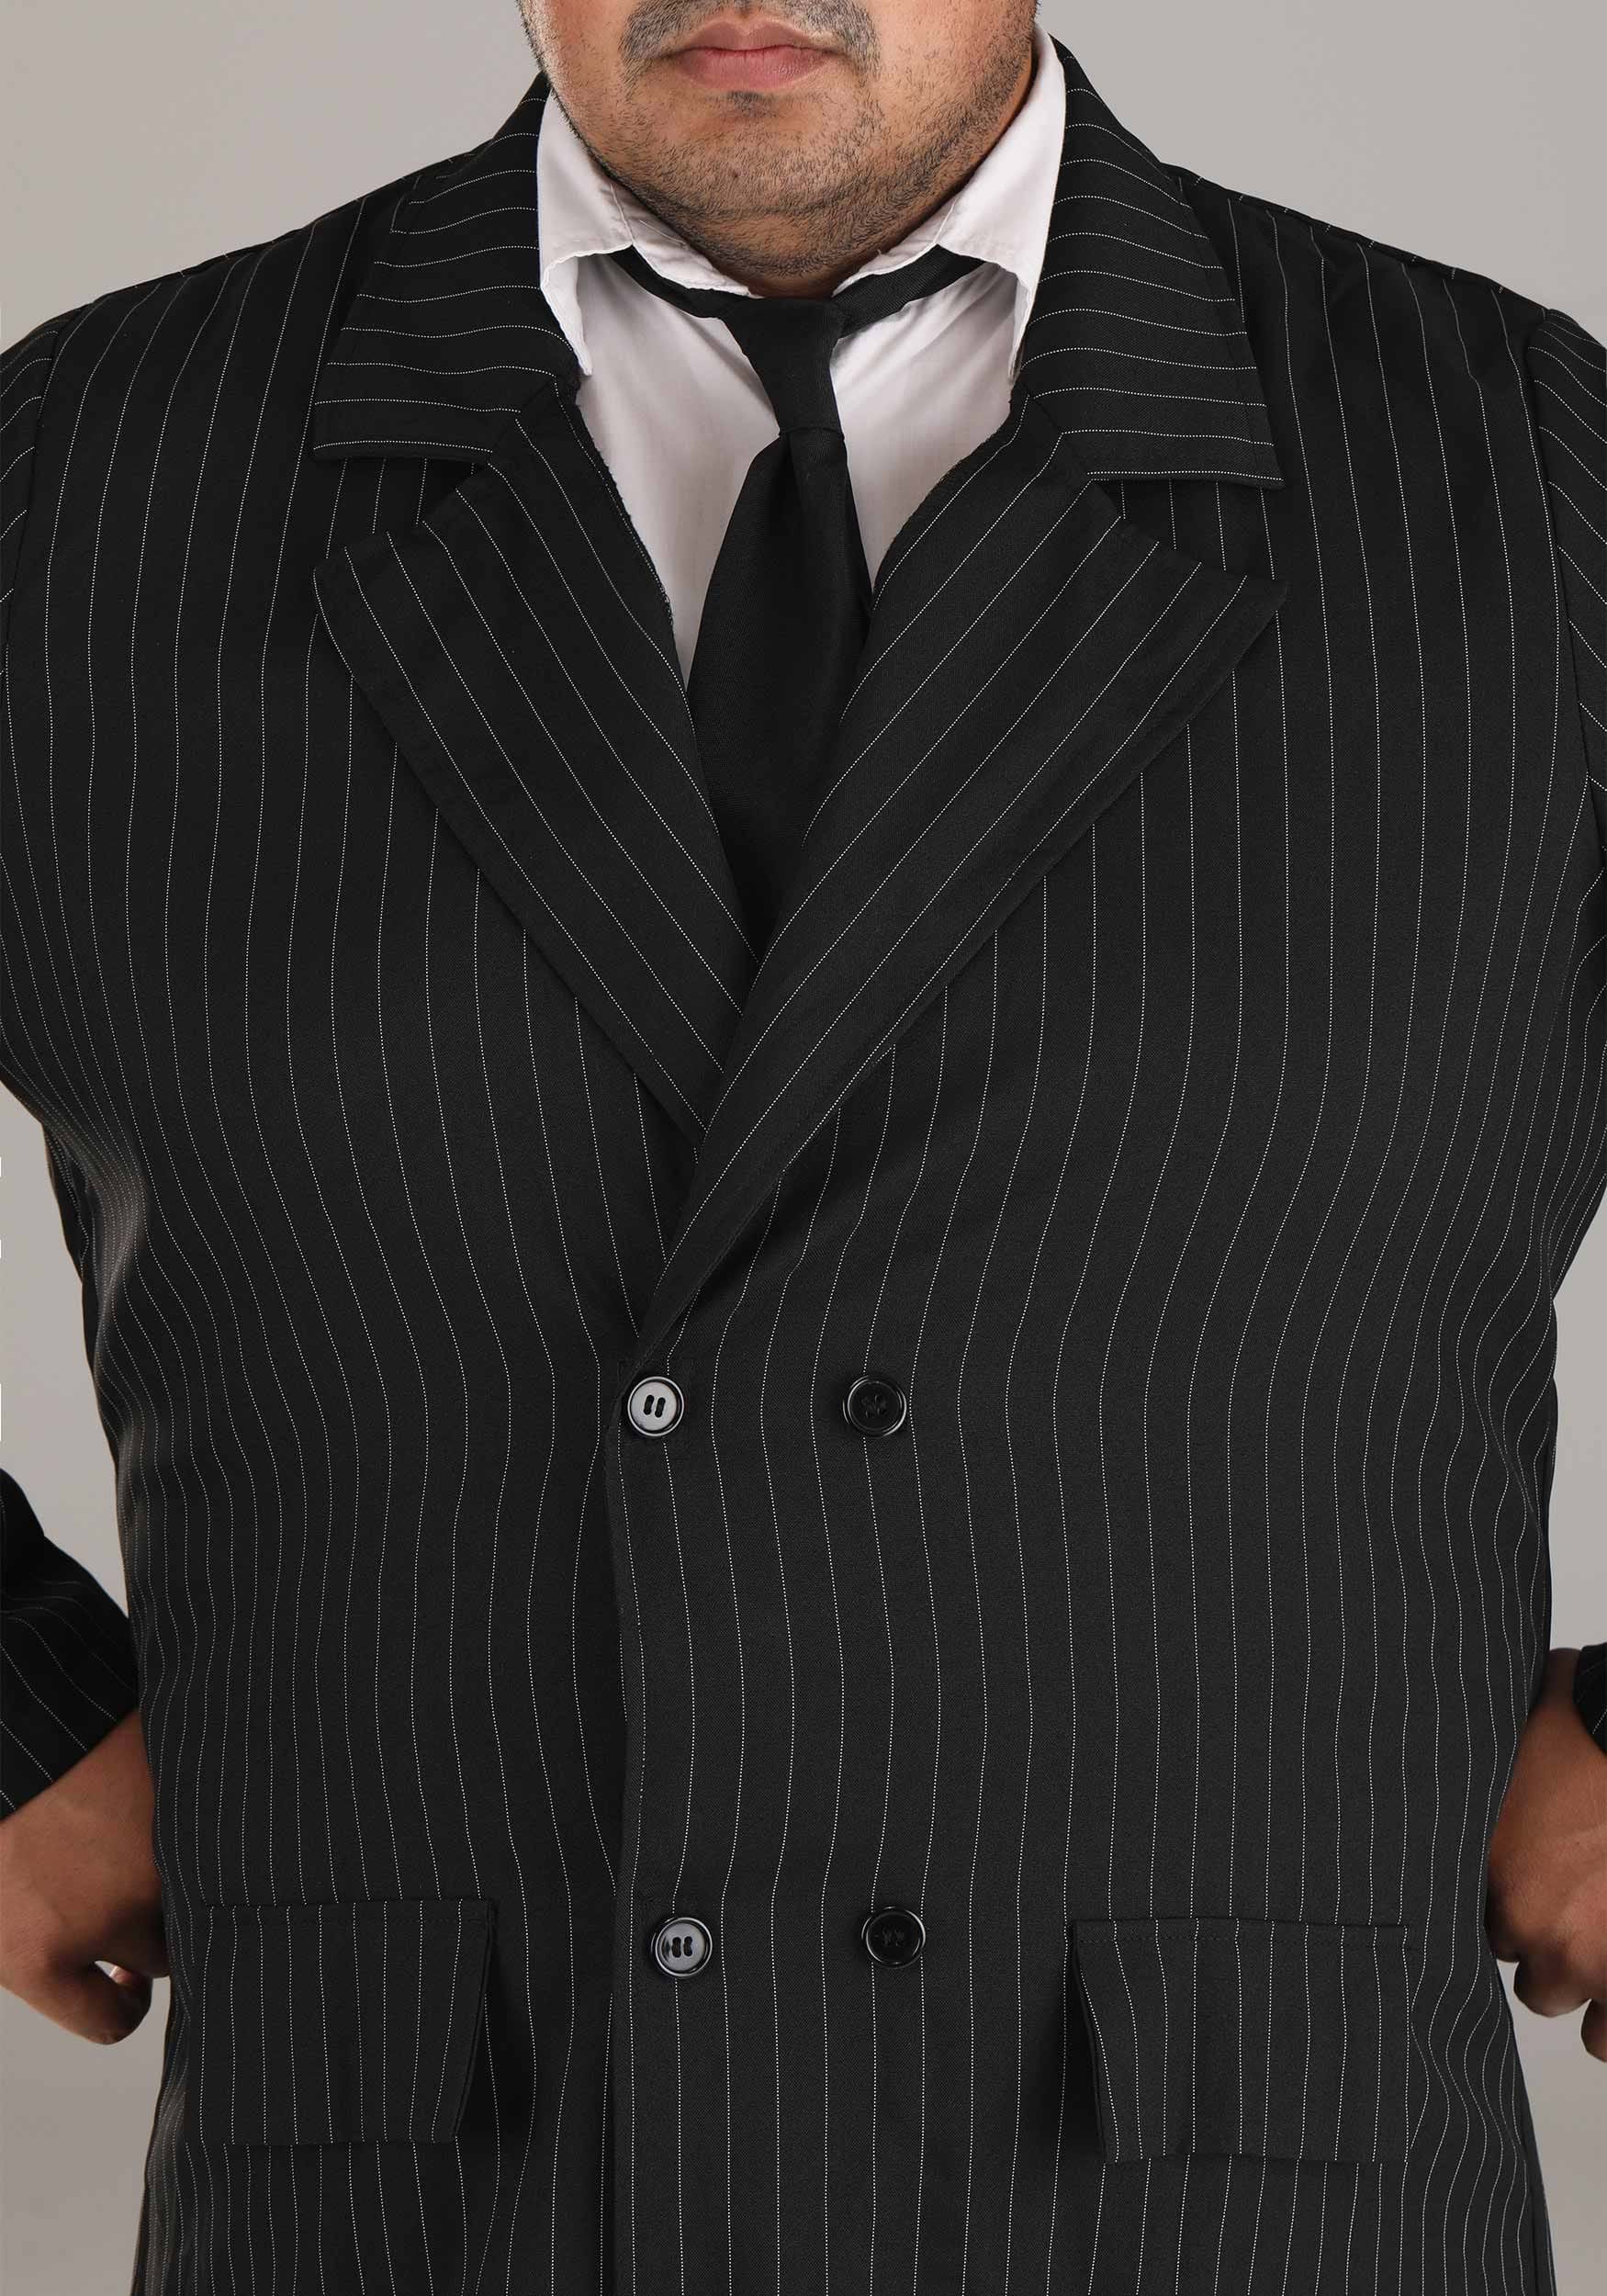 Gangster Plus Size Pinstripe Costume , Mobster Costume